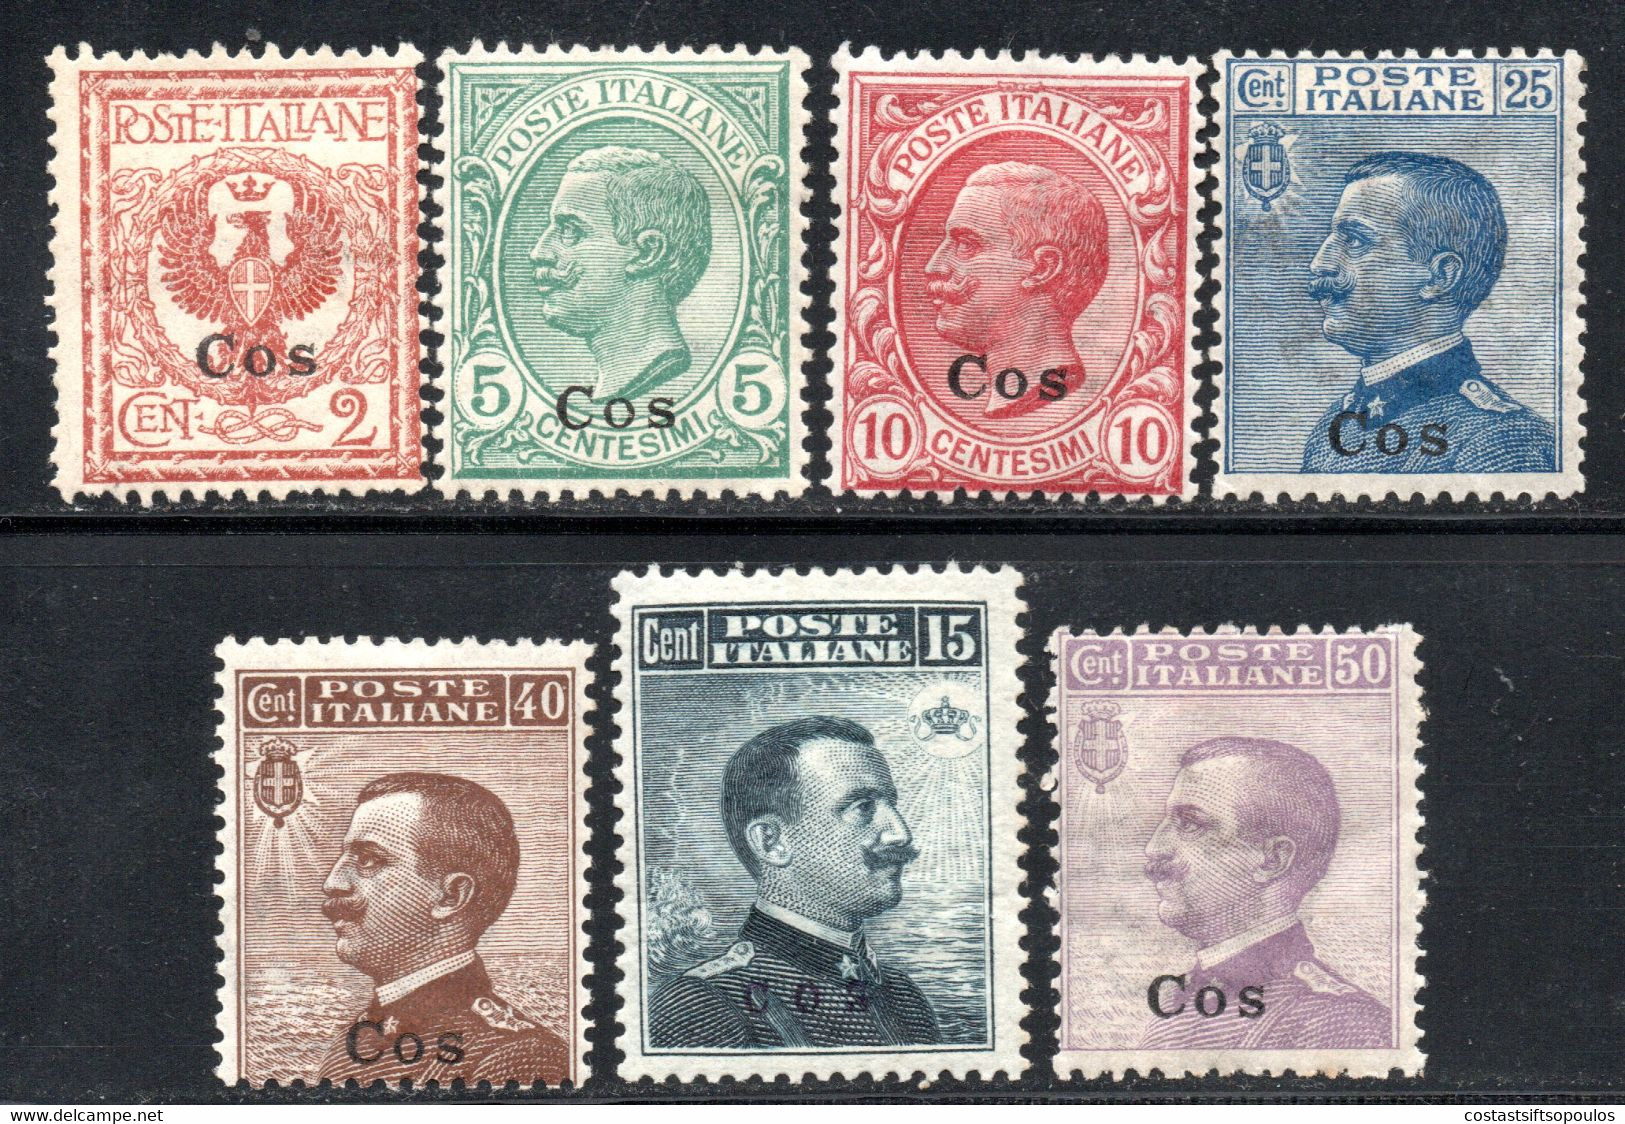 727.GREECE.ITALY,DODECANESE,COS,1912 #3-9 MH. - Imvros